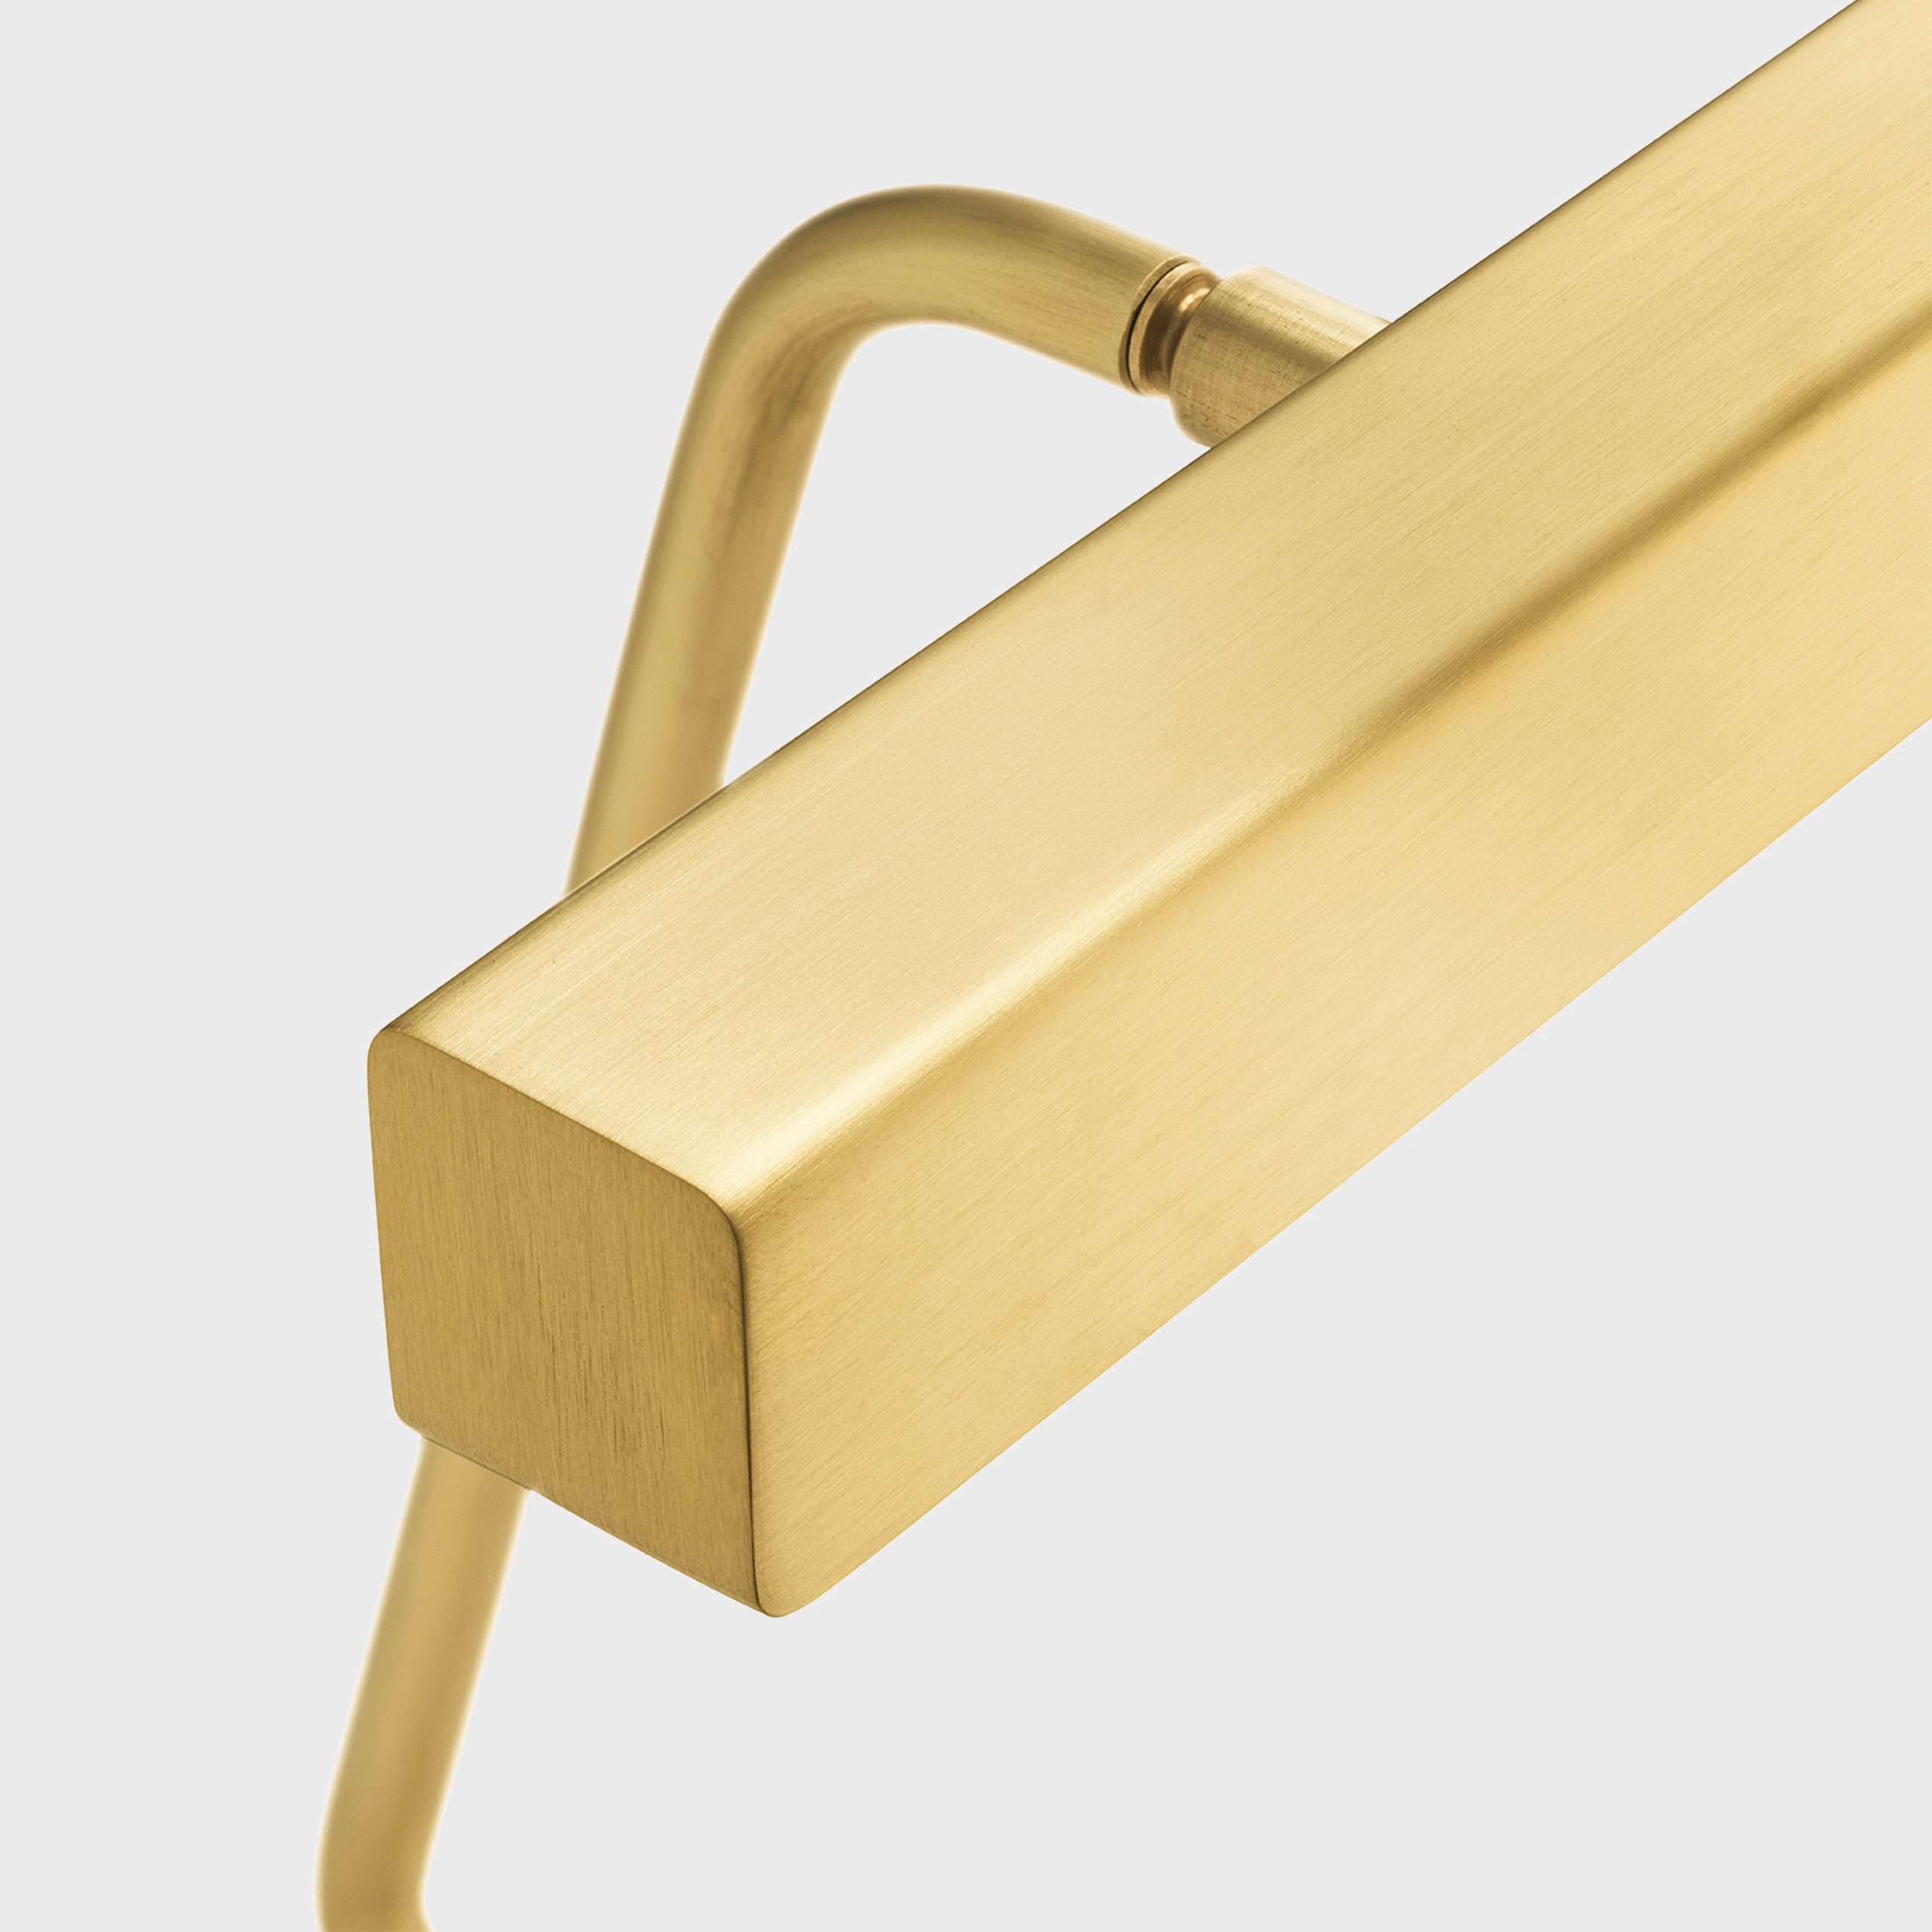 Brushed Brass